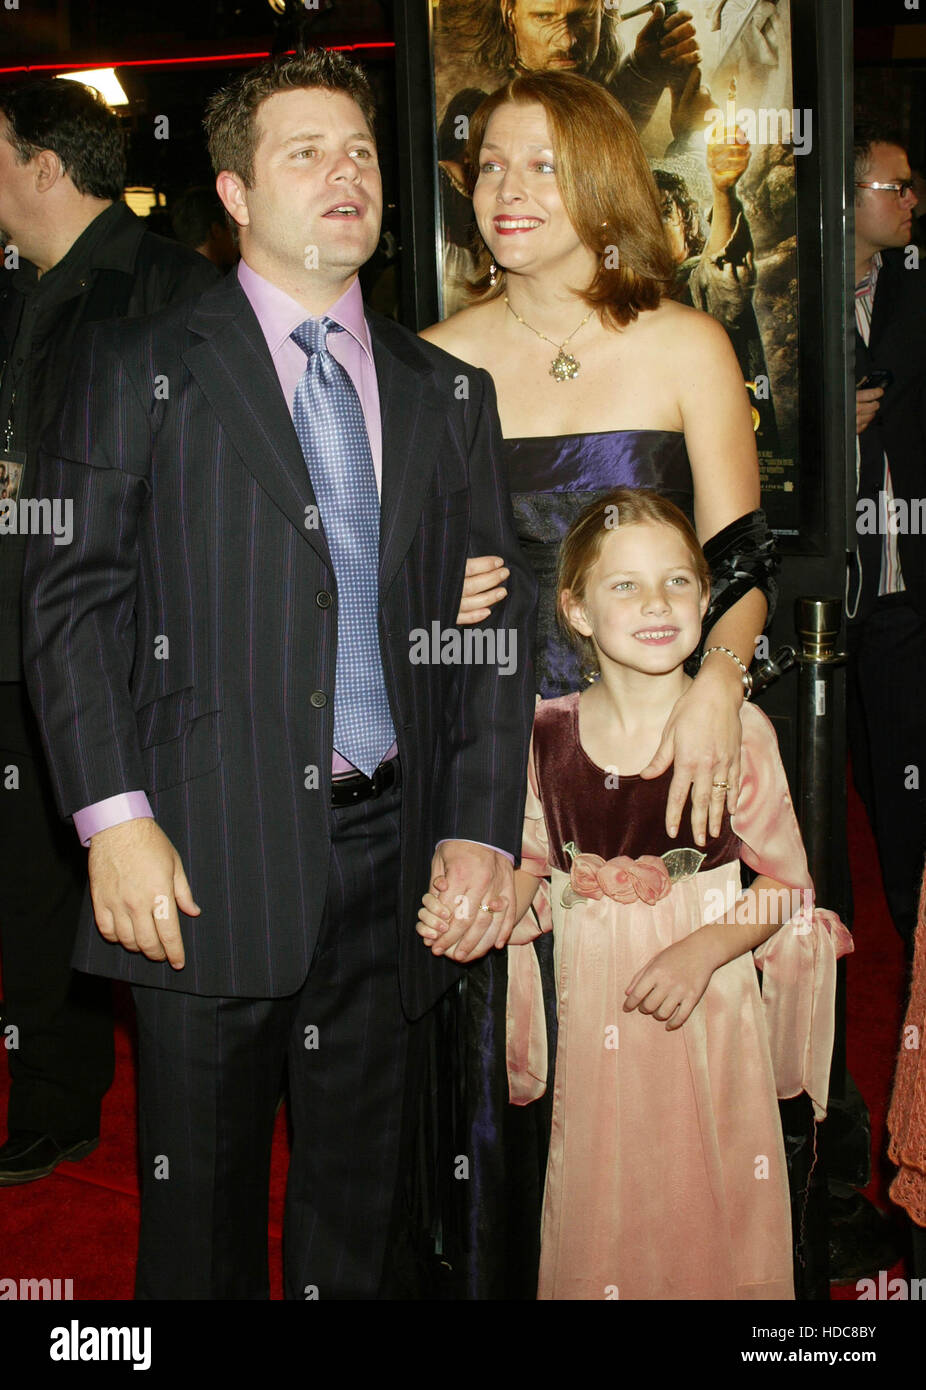 Sean Astin with wife, Christine, and daughter, Alexandra at the premiere of  Lord of the Rings: Return of the King, at the Mann Village Theatre in Los  Angeles on Wednesday, Decemeber 3,